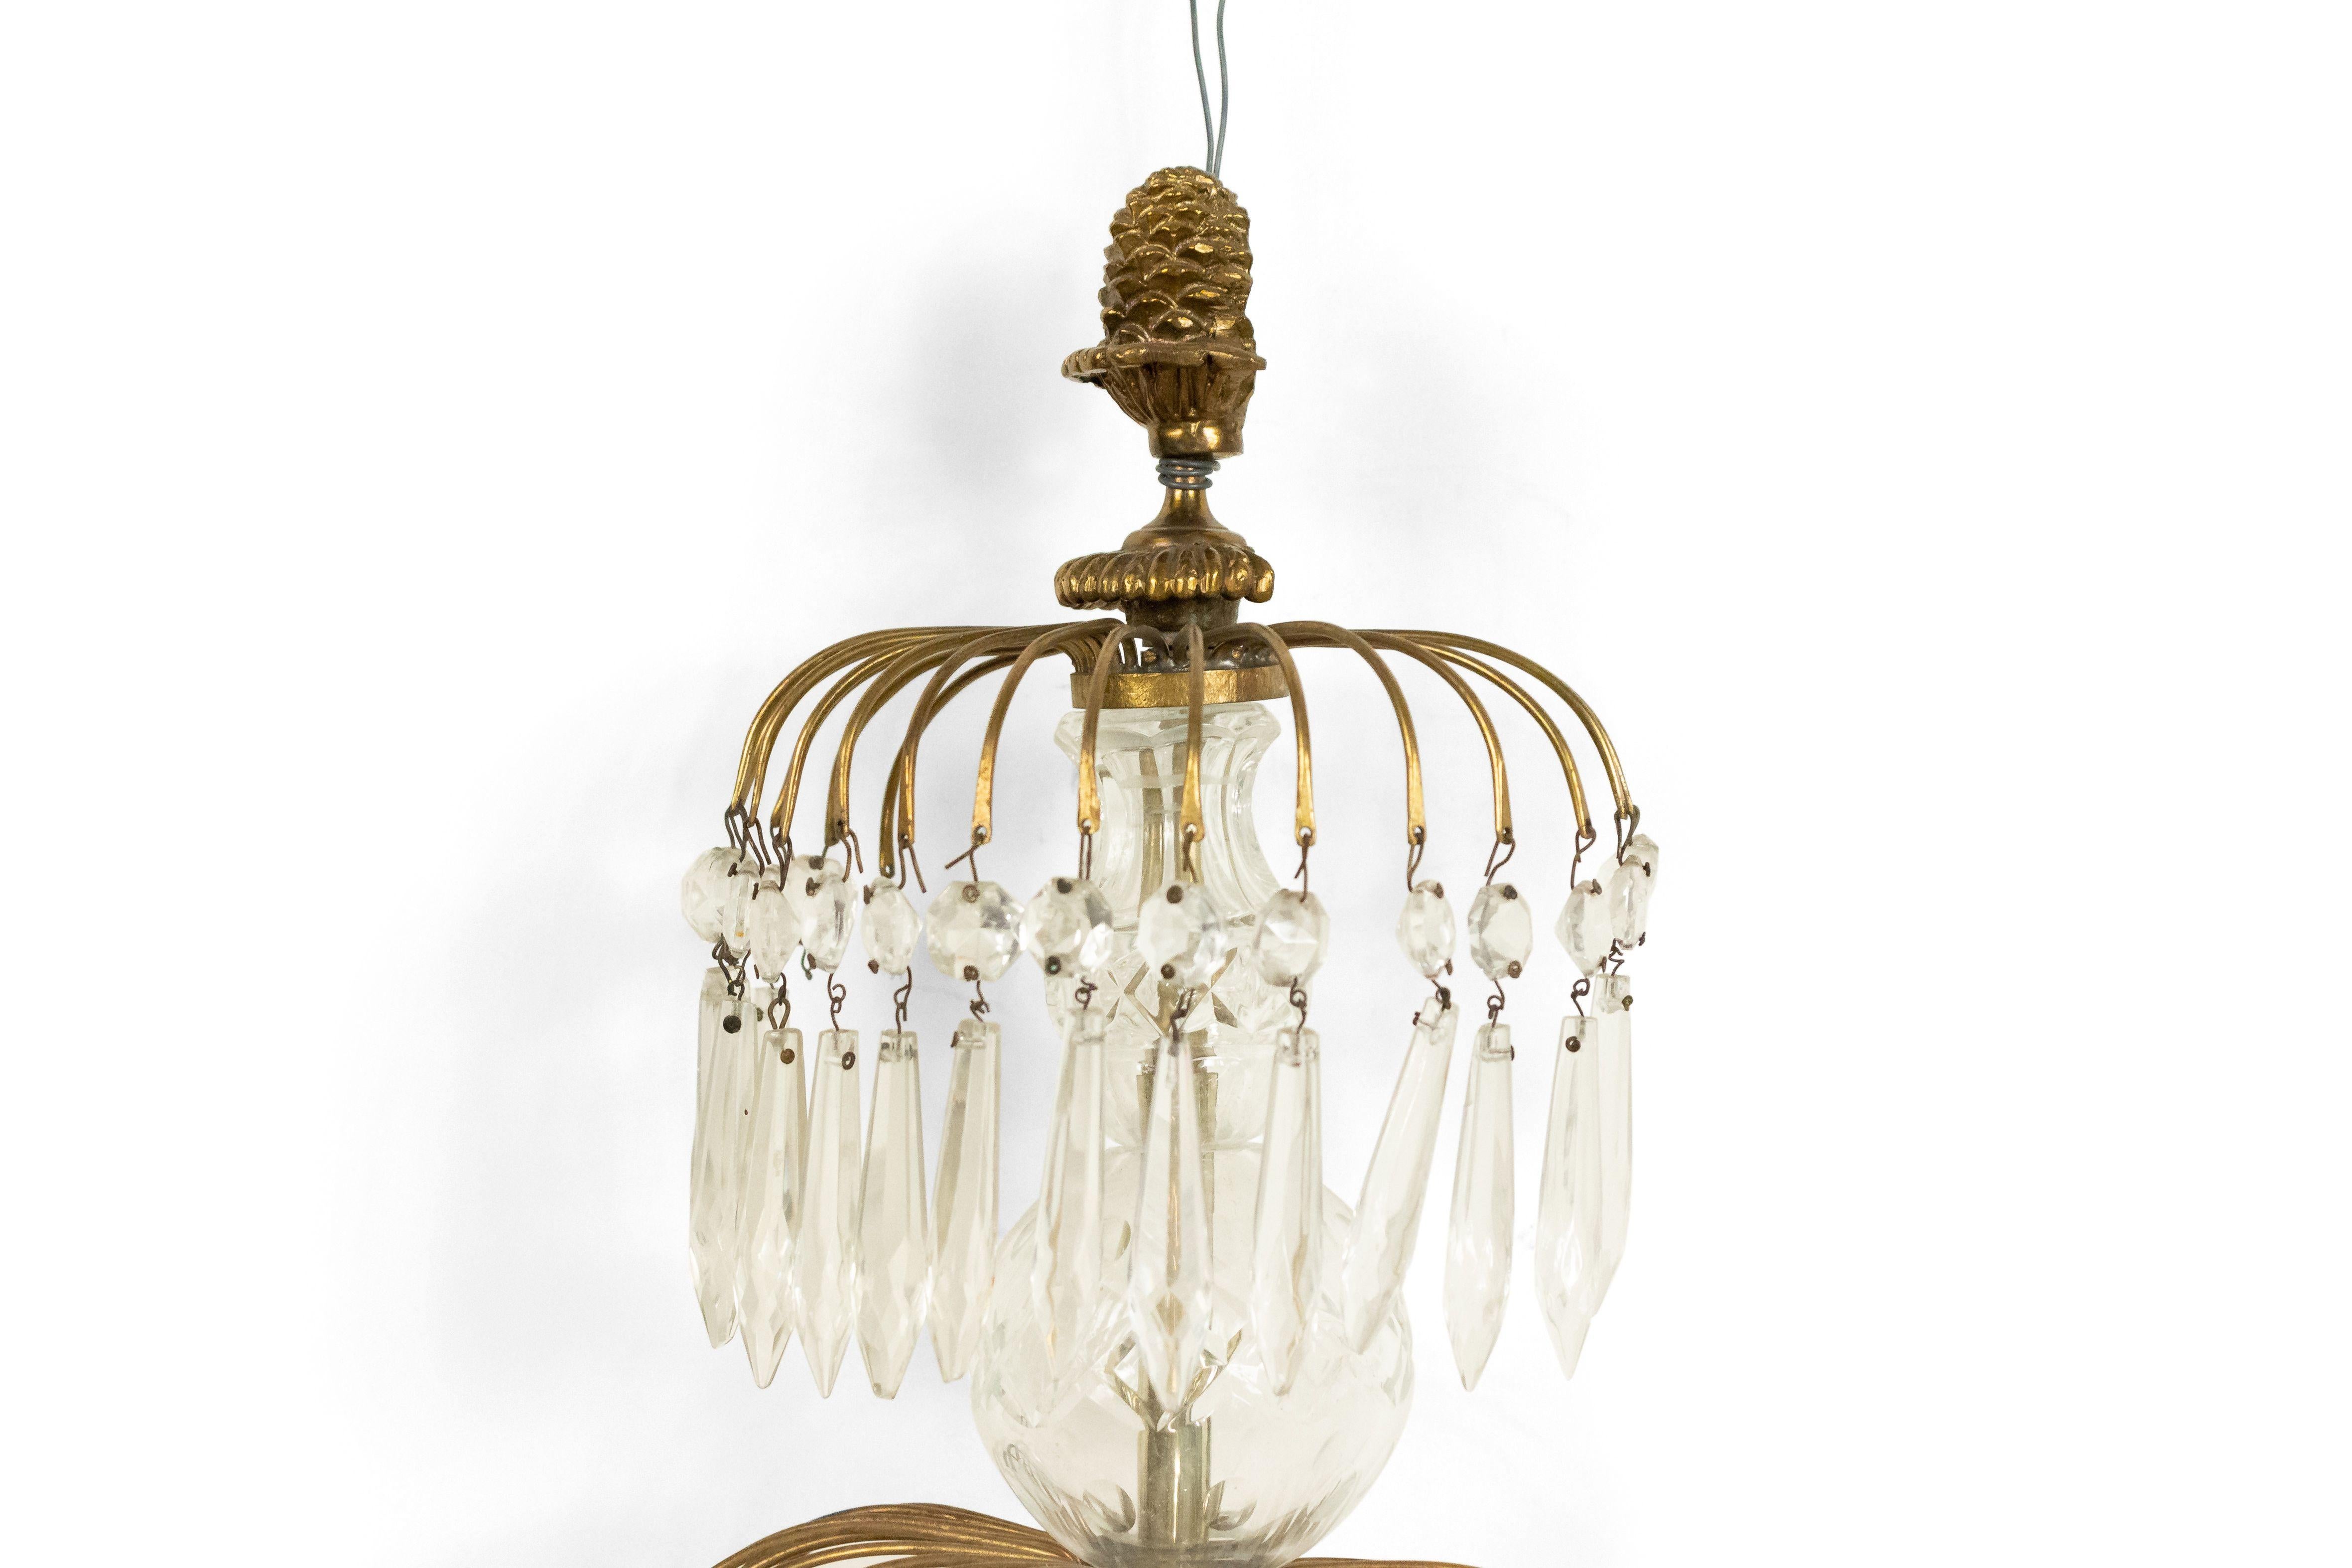 English Regency style 19th-20th century 4-tier crystal drop and brass 3-arm wall sconce.